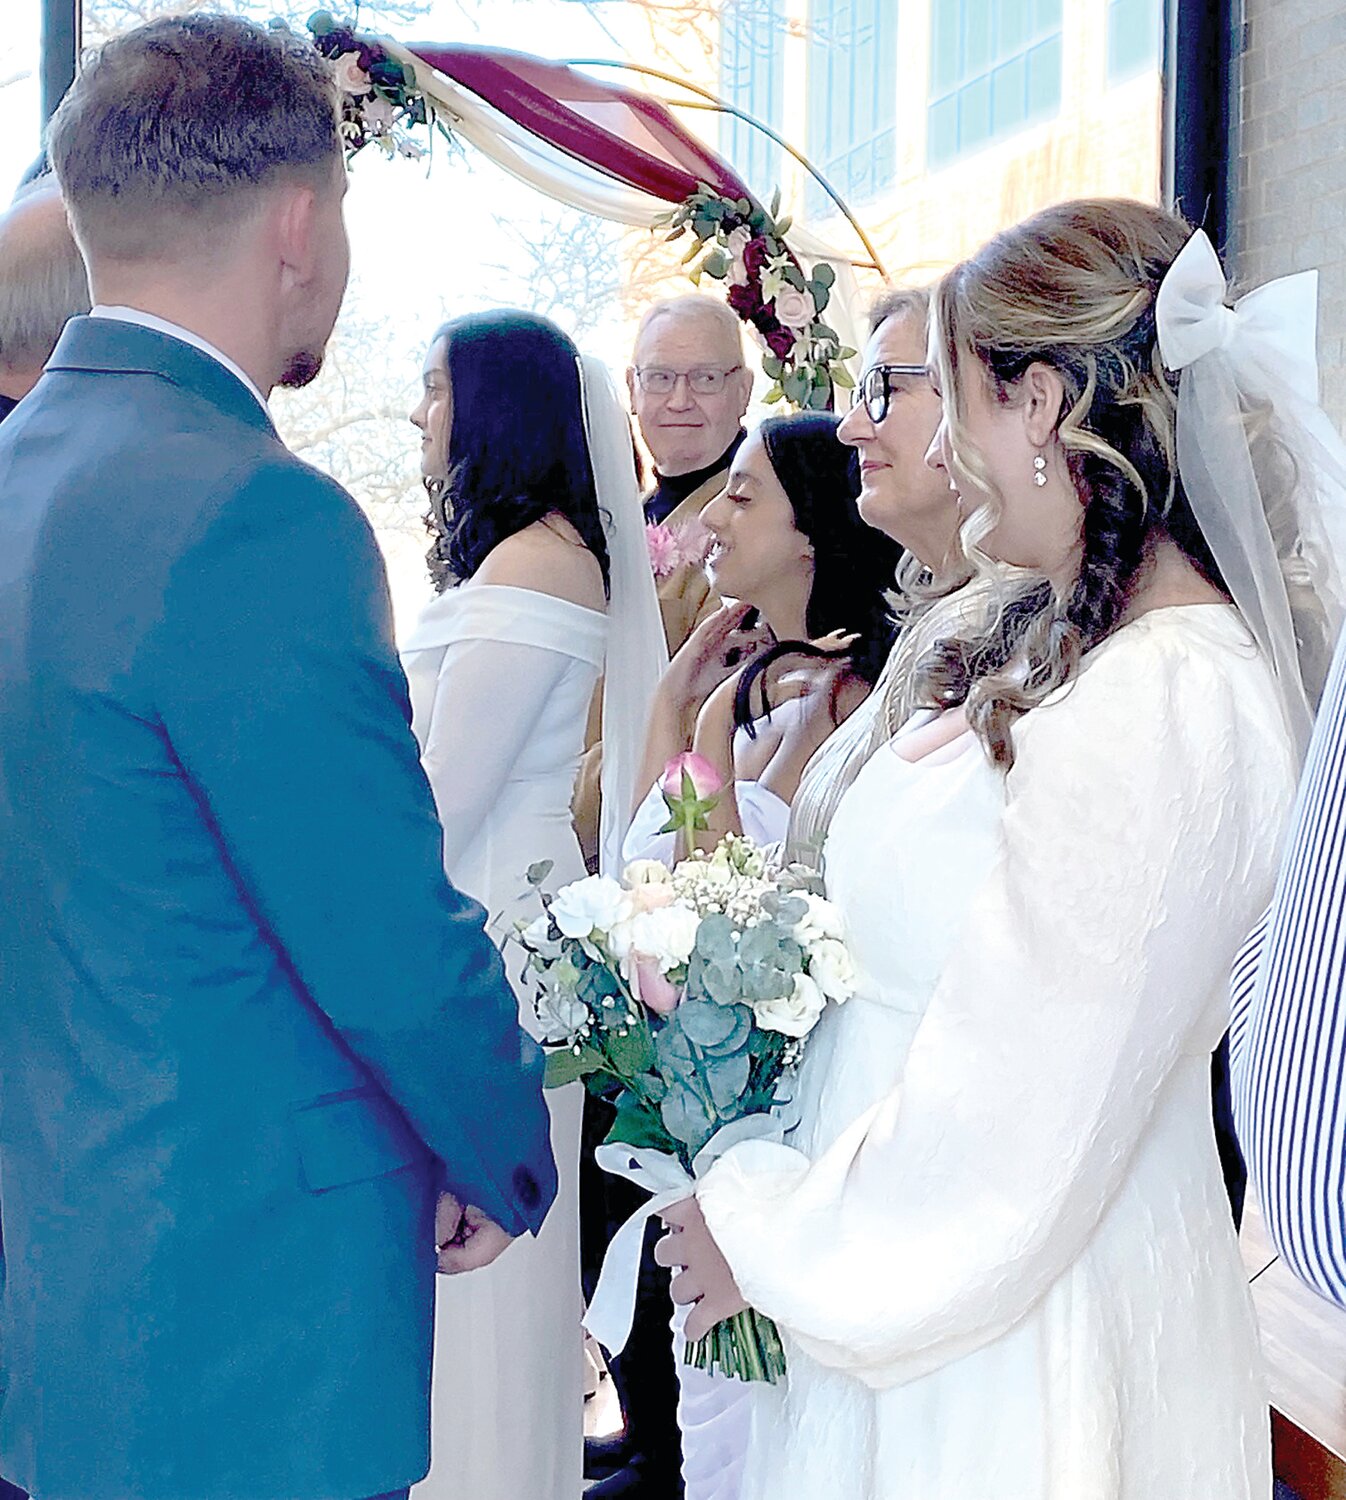 Couples from across the area were married Valentine’s Day in the light-filled rotunda at Bucks County’s administrative building. The free, special event is organized by Register of Wills Linda Bobrin and her staff.